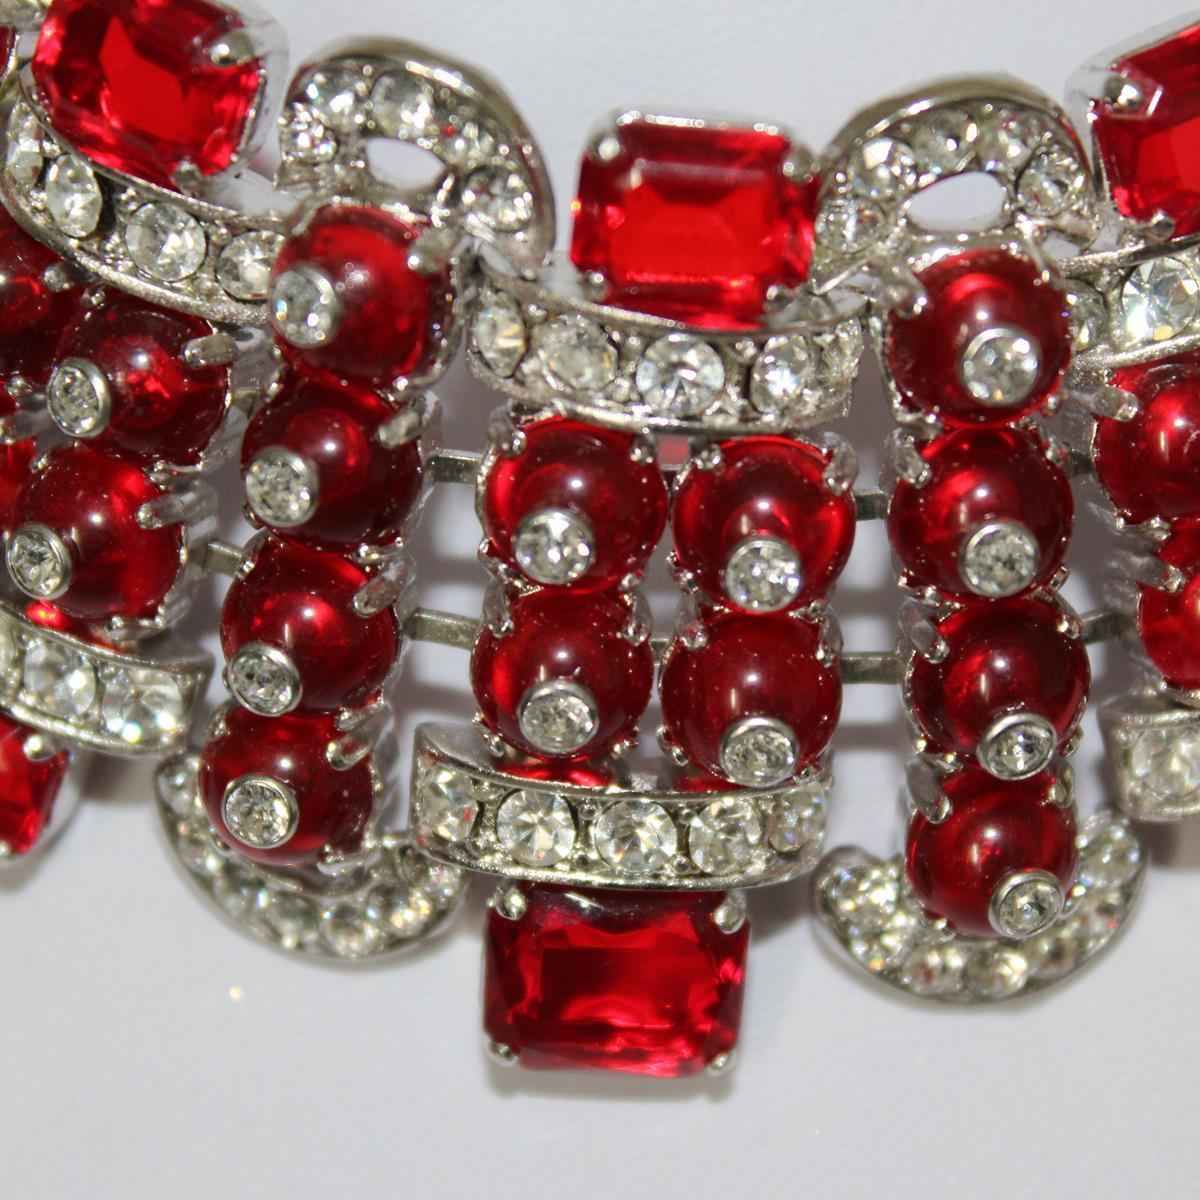 Fantastic masterpiece by Carlo Zini
One of the world greatest bijoux designers
Perfect for San Valentino !
Non allergenic rhodium
Amazing hand creation of Swarovski crystals
Ruby like stones and resins 
100% Artisanal work
Made in Milano
Worldwide